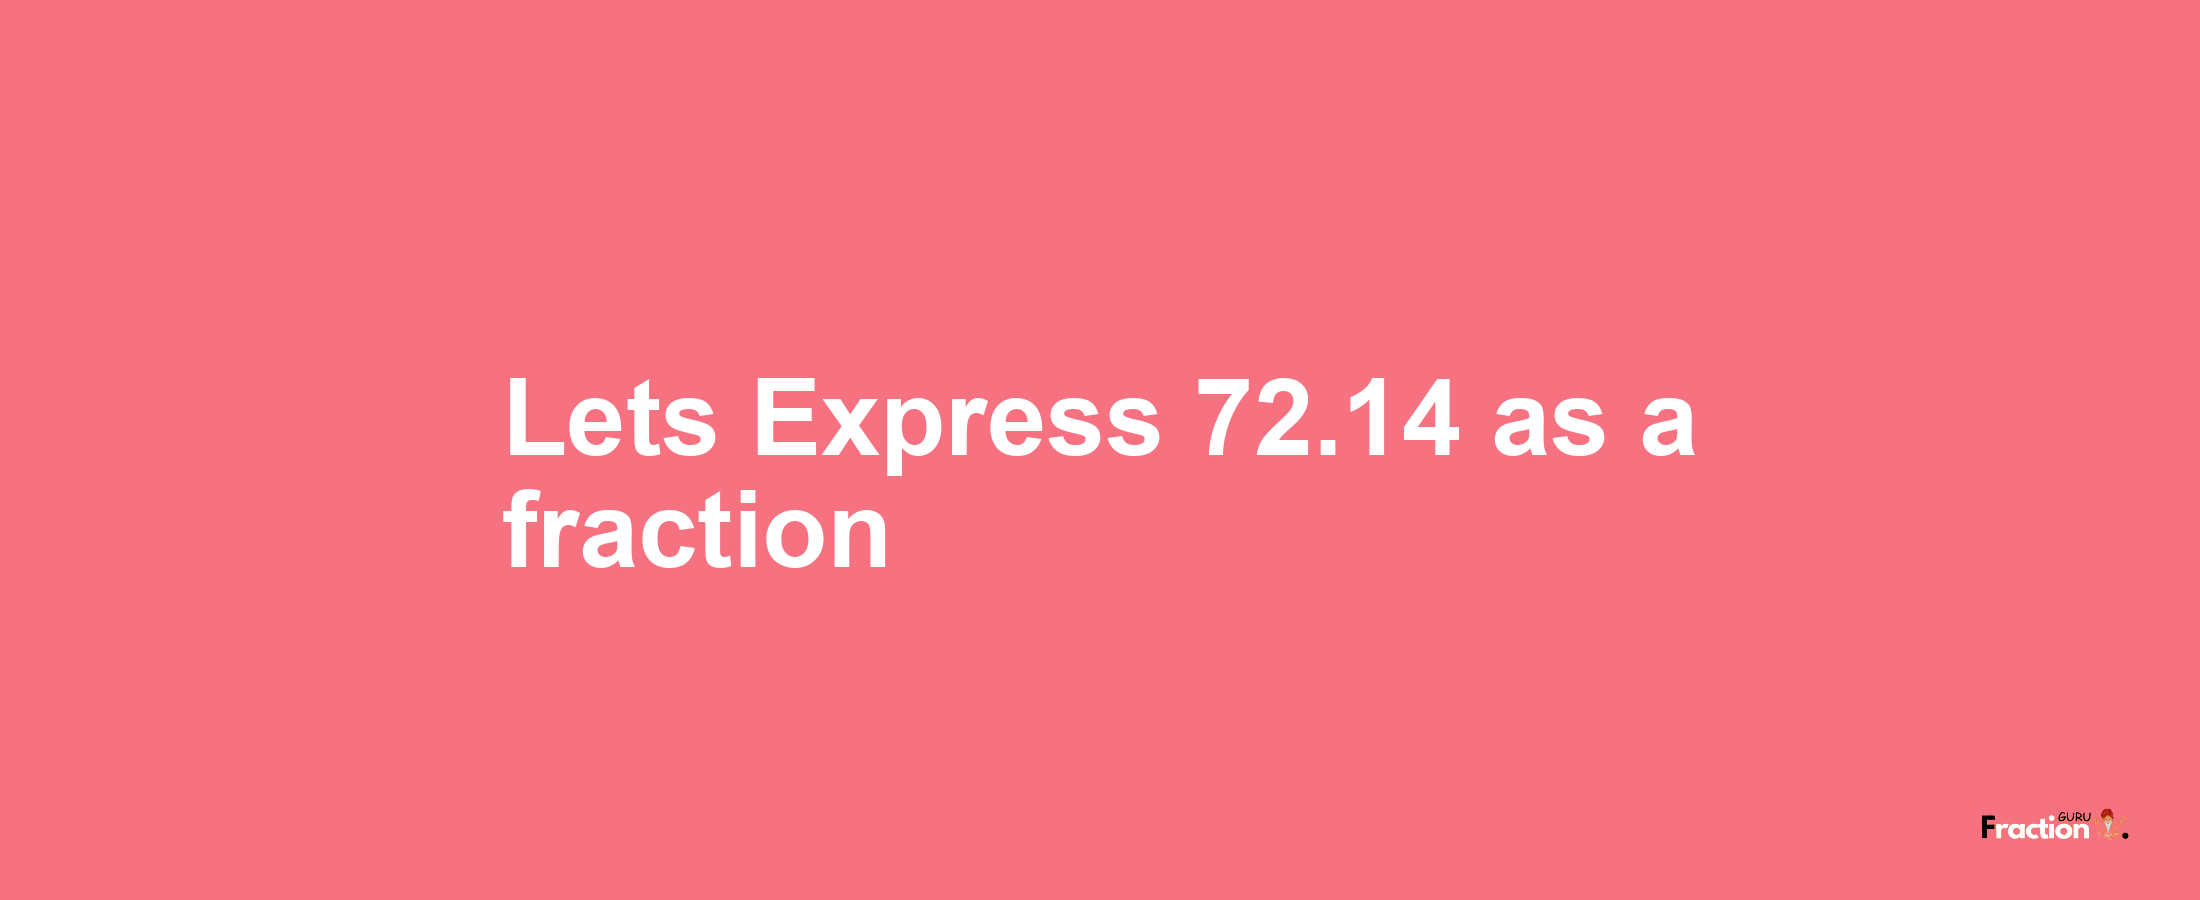 Lets Express 72.14 as afraction